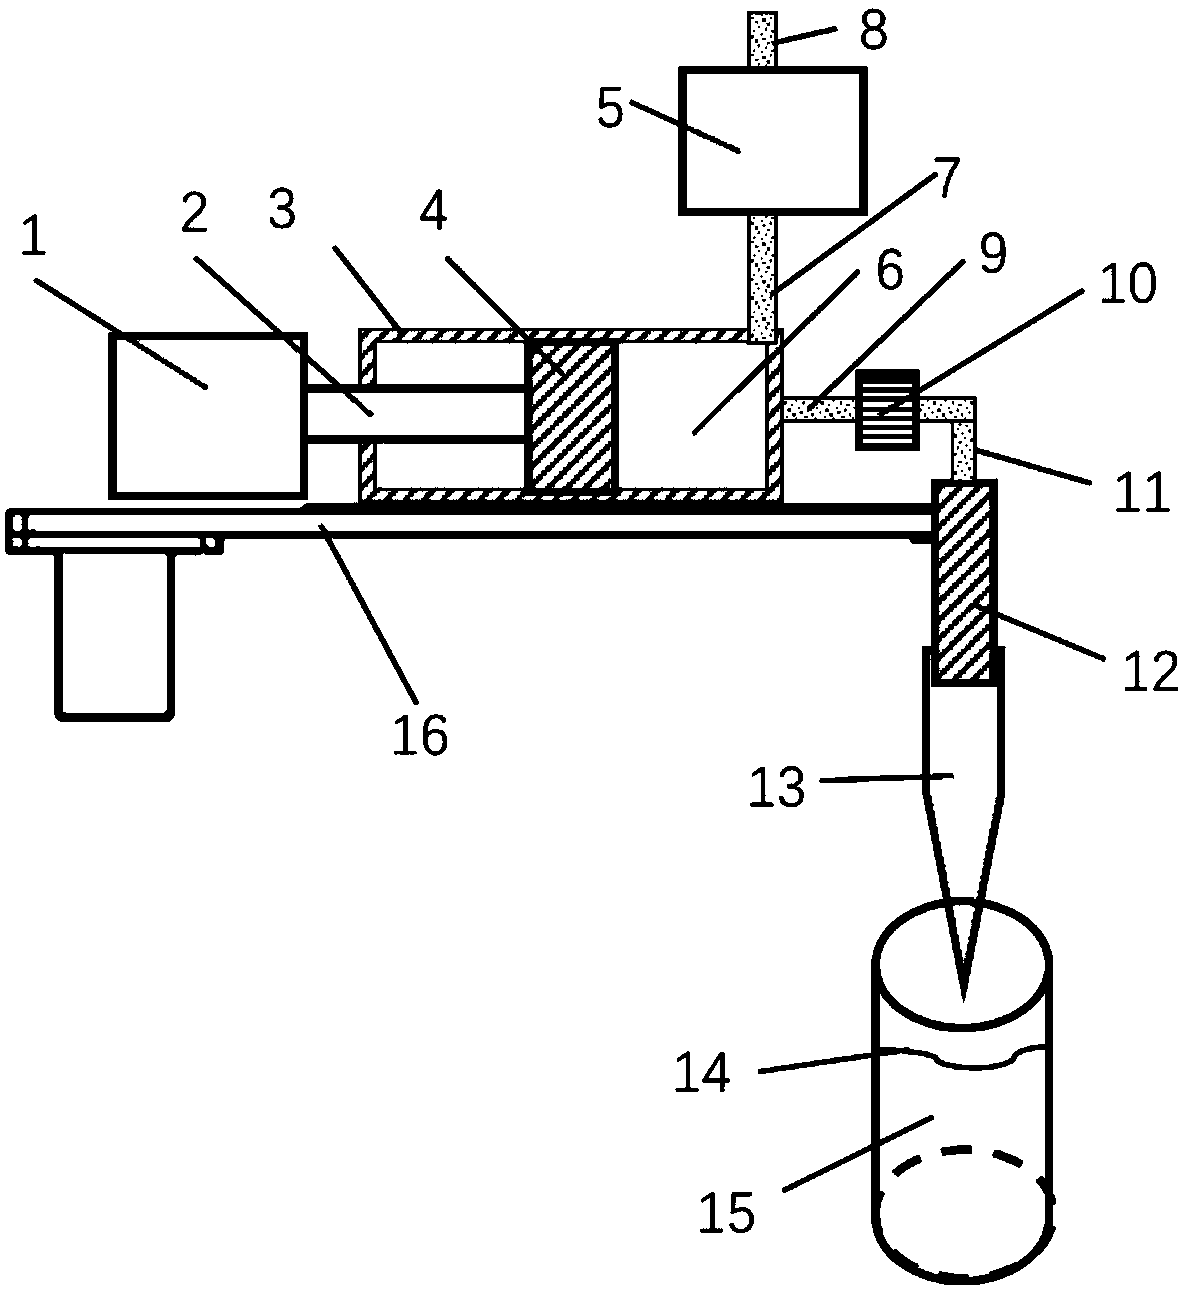 Liquid level detecting device for active immunity workstation